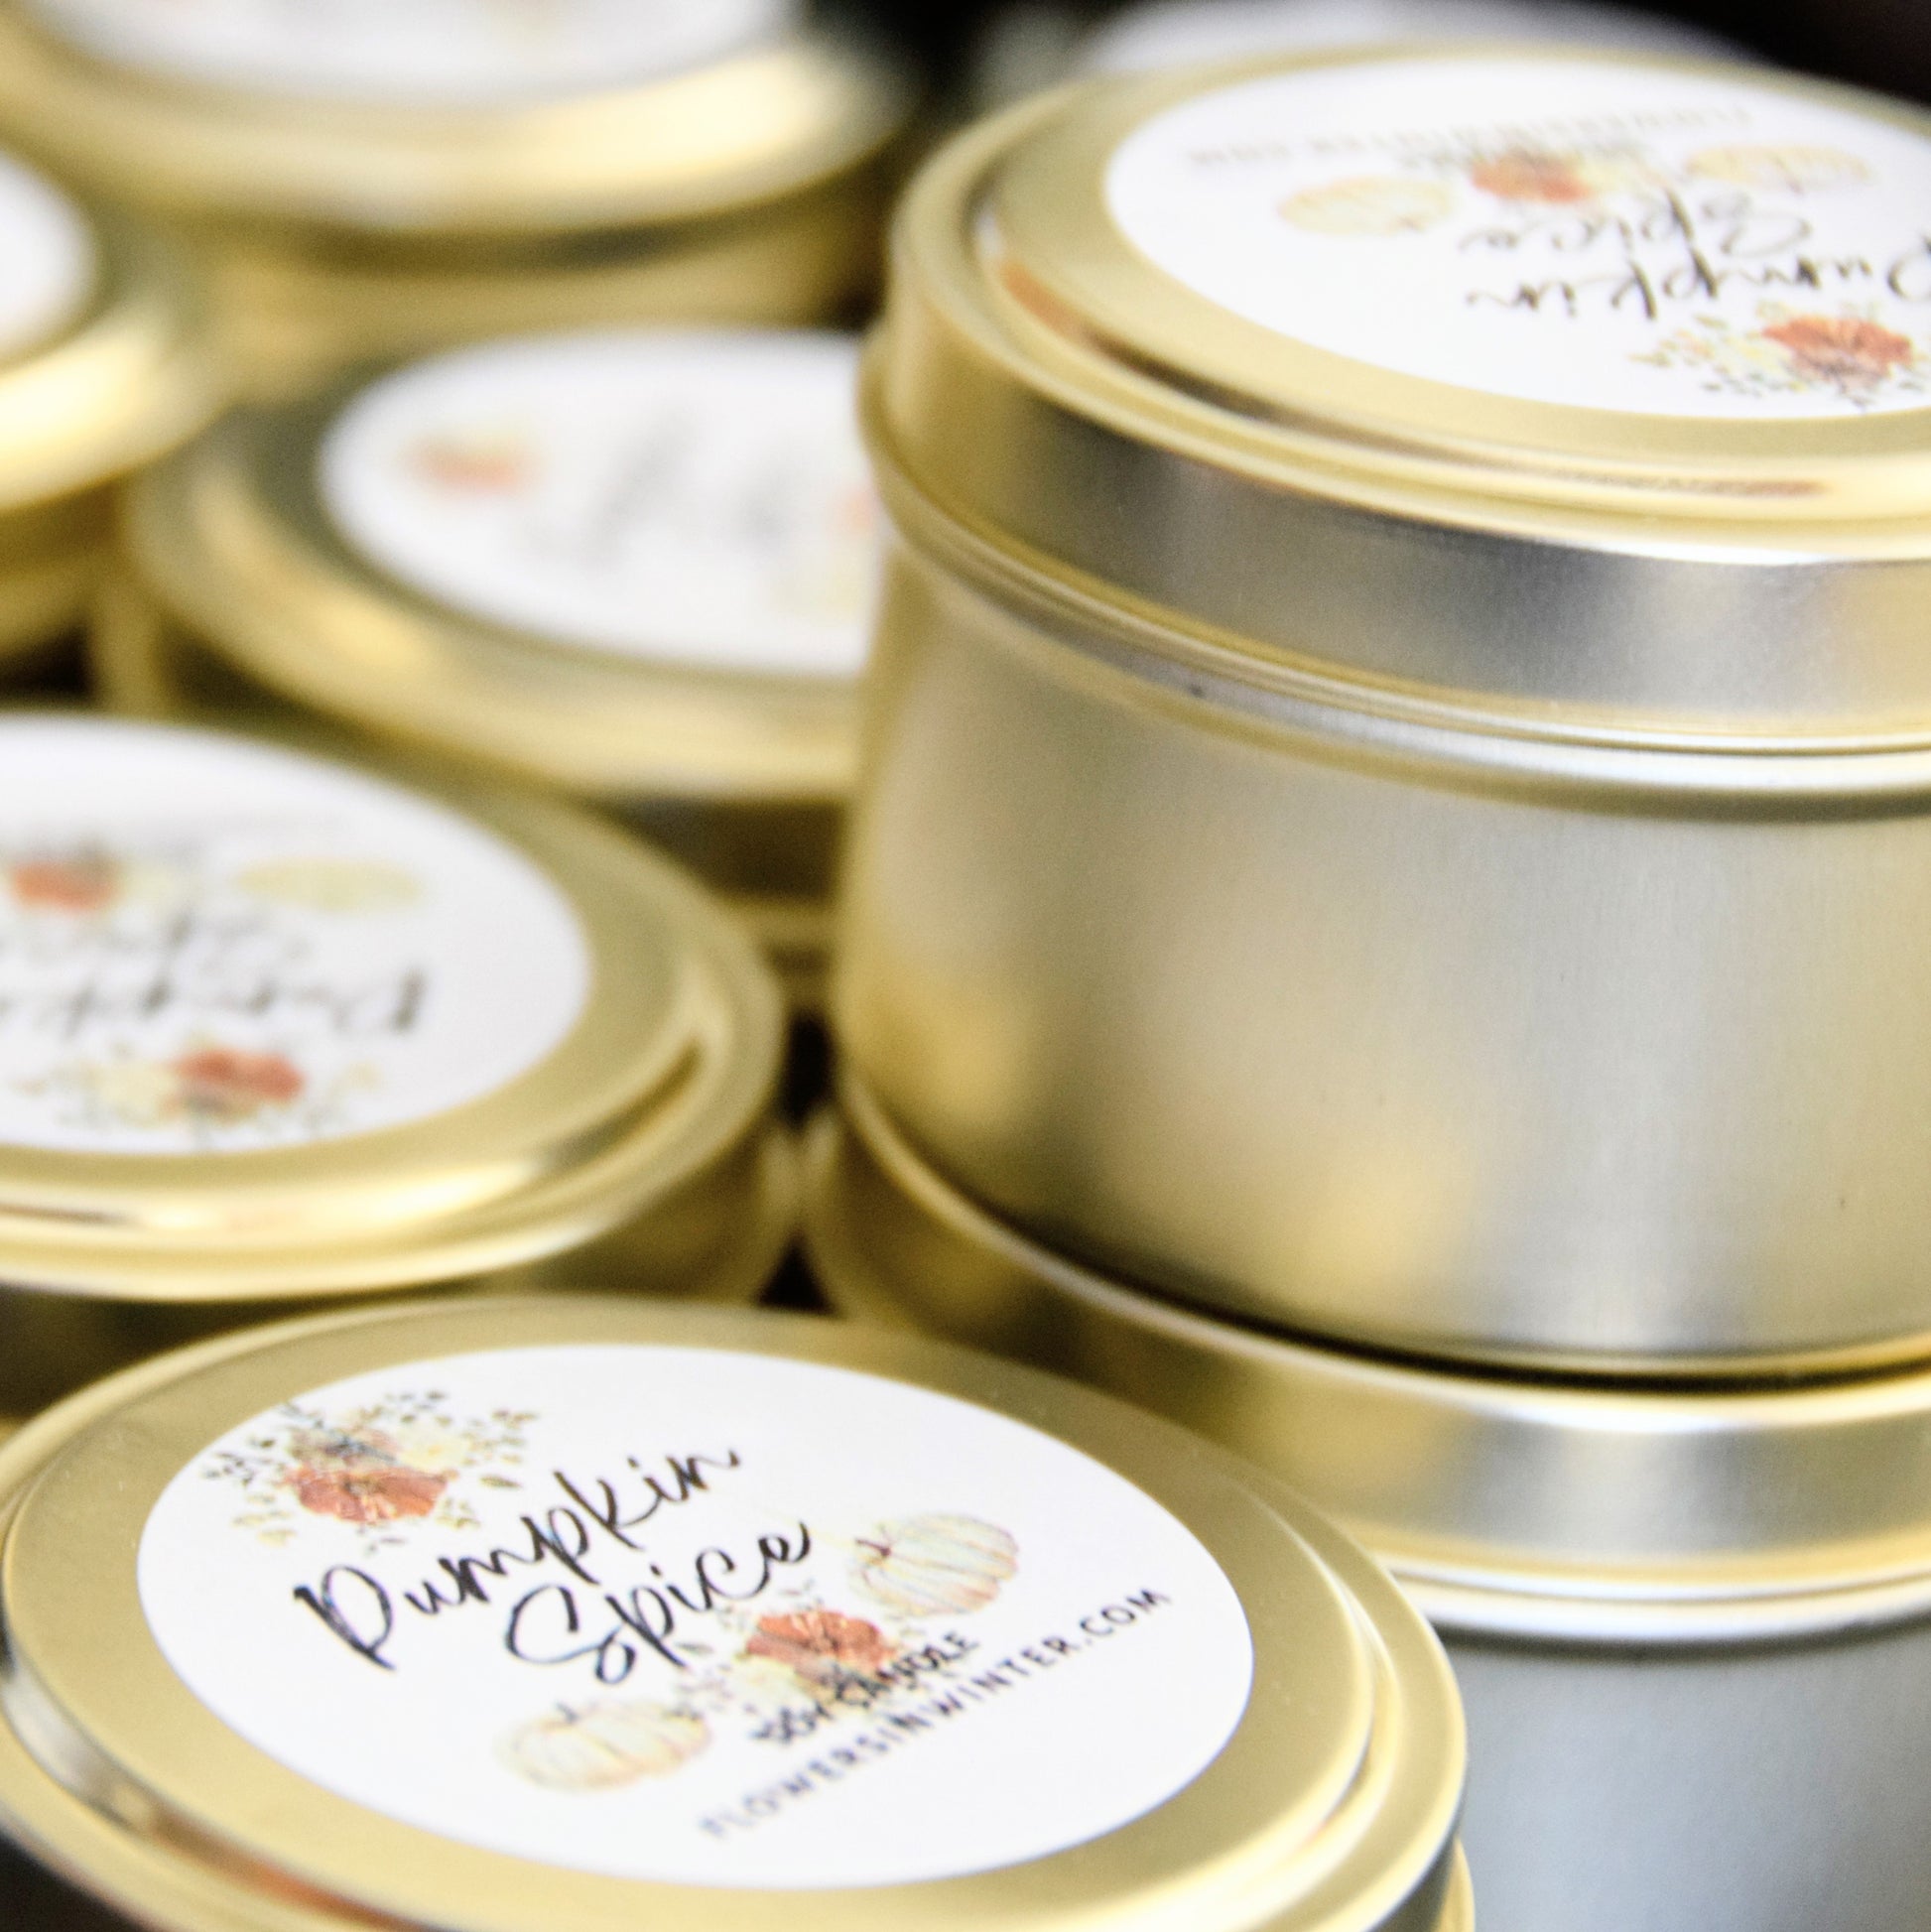 Pumpkin Spice Tin Candle - Flowers in Winter Shop